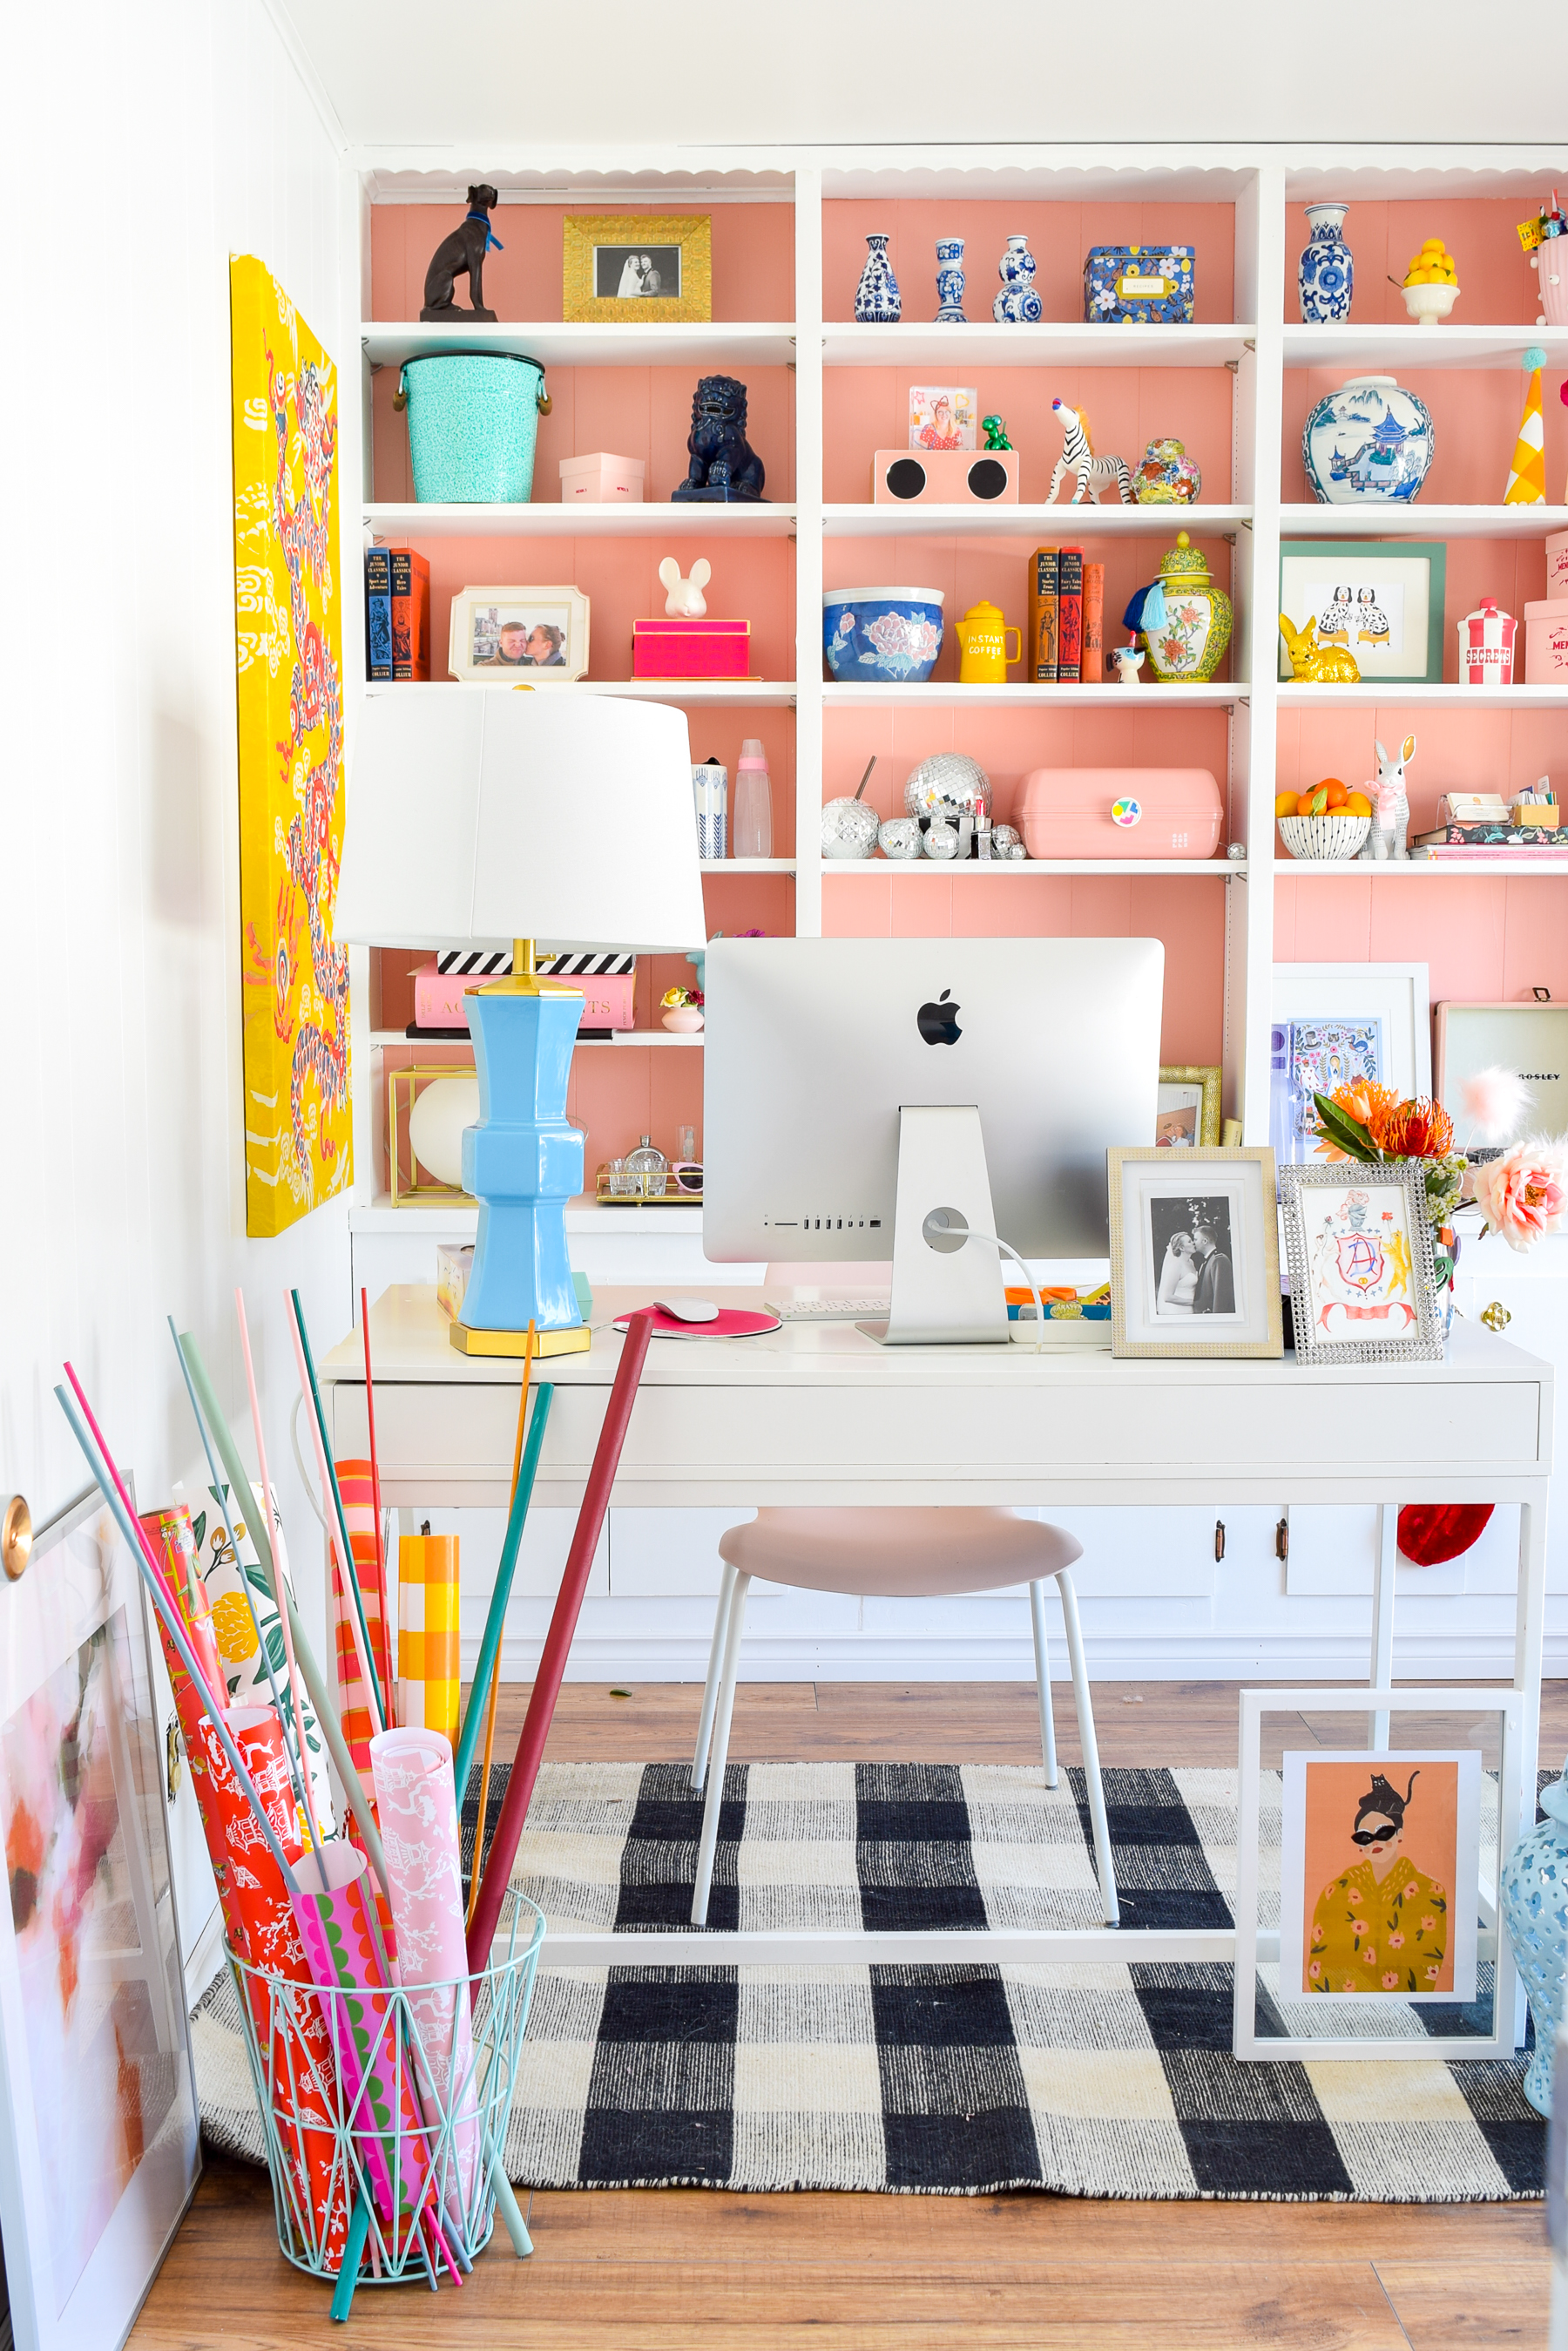 How To Turn A Small Space Into A Dream Craft Room Workspace On A Budget T Moore Home Interior Design Studio